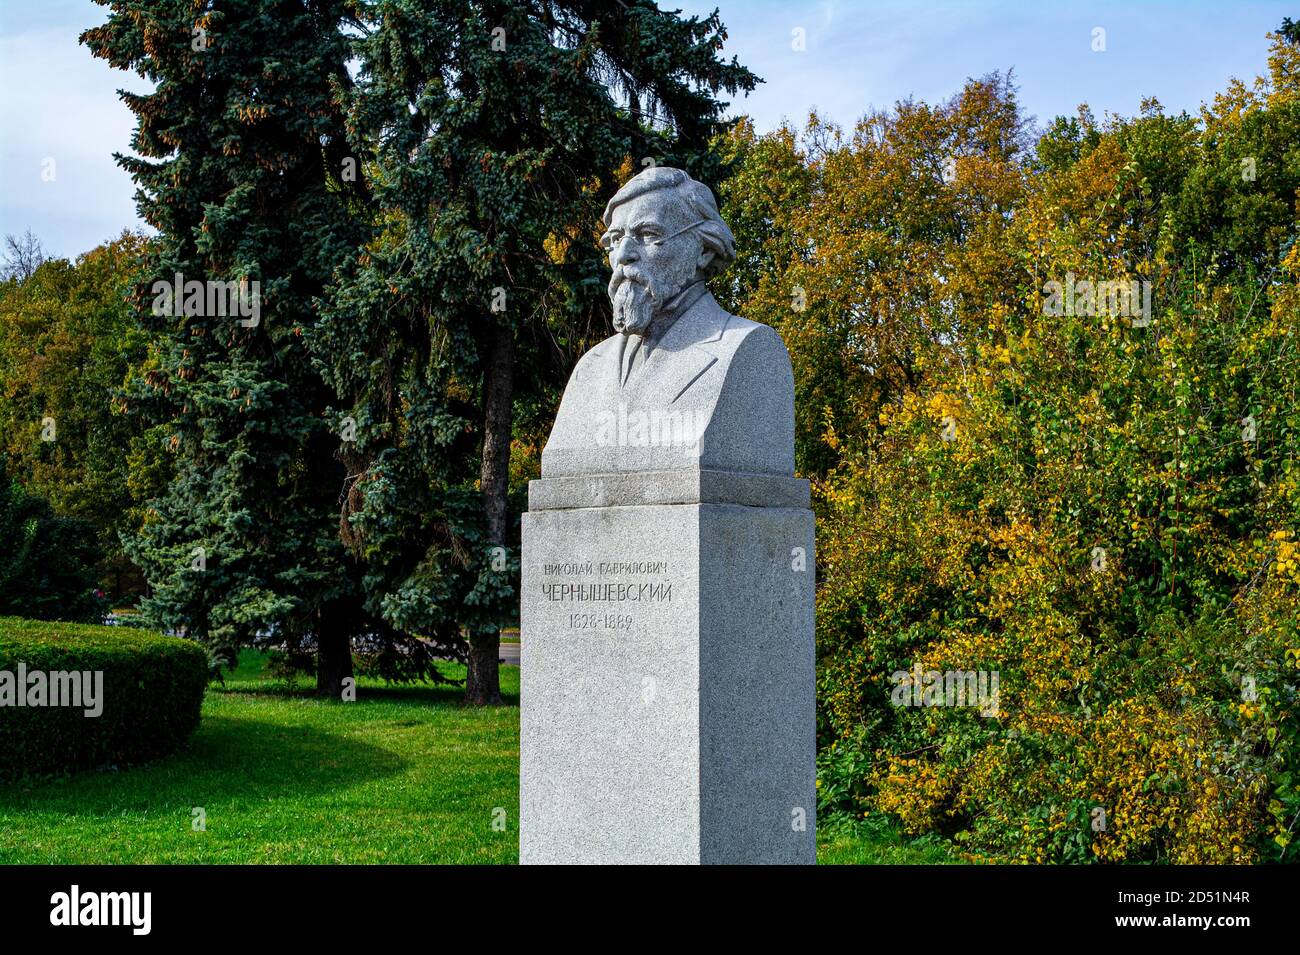 Moscow, Russia - October 12, 2020: Attractions of Moscow. Bust of Russian philosopher Nikolai Gavrilovich Chernyshevsky next to Moscow State Universit Stock Photo